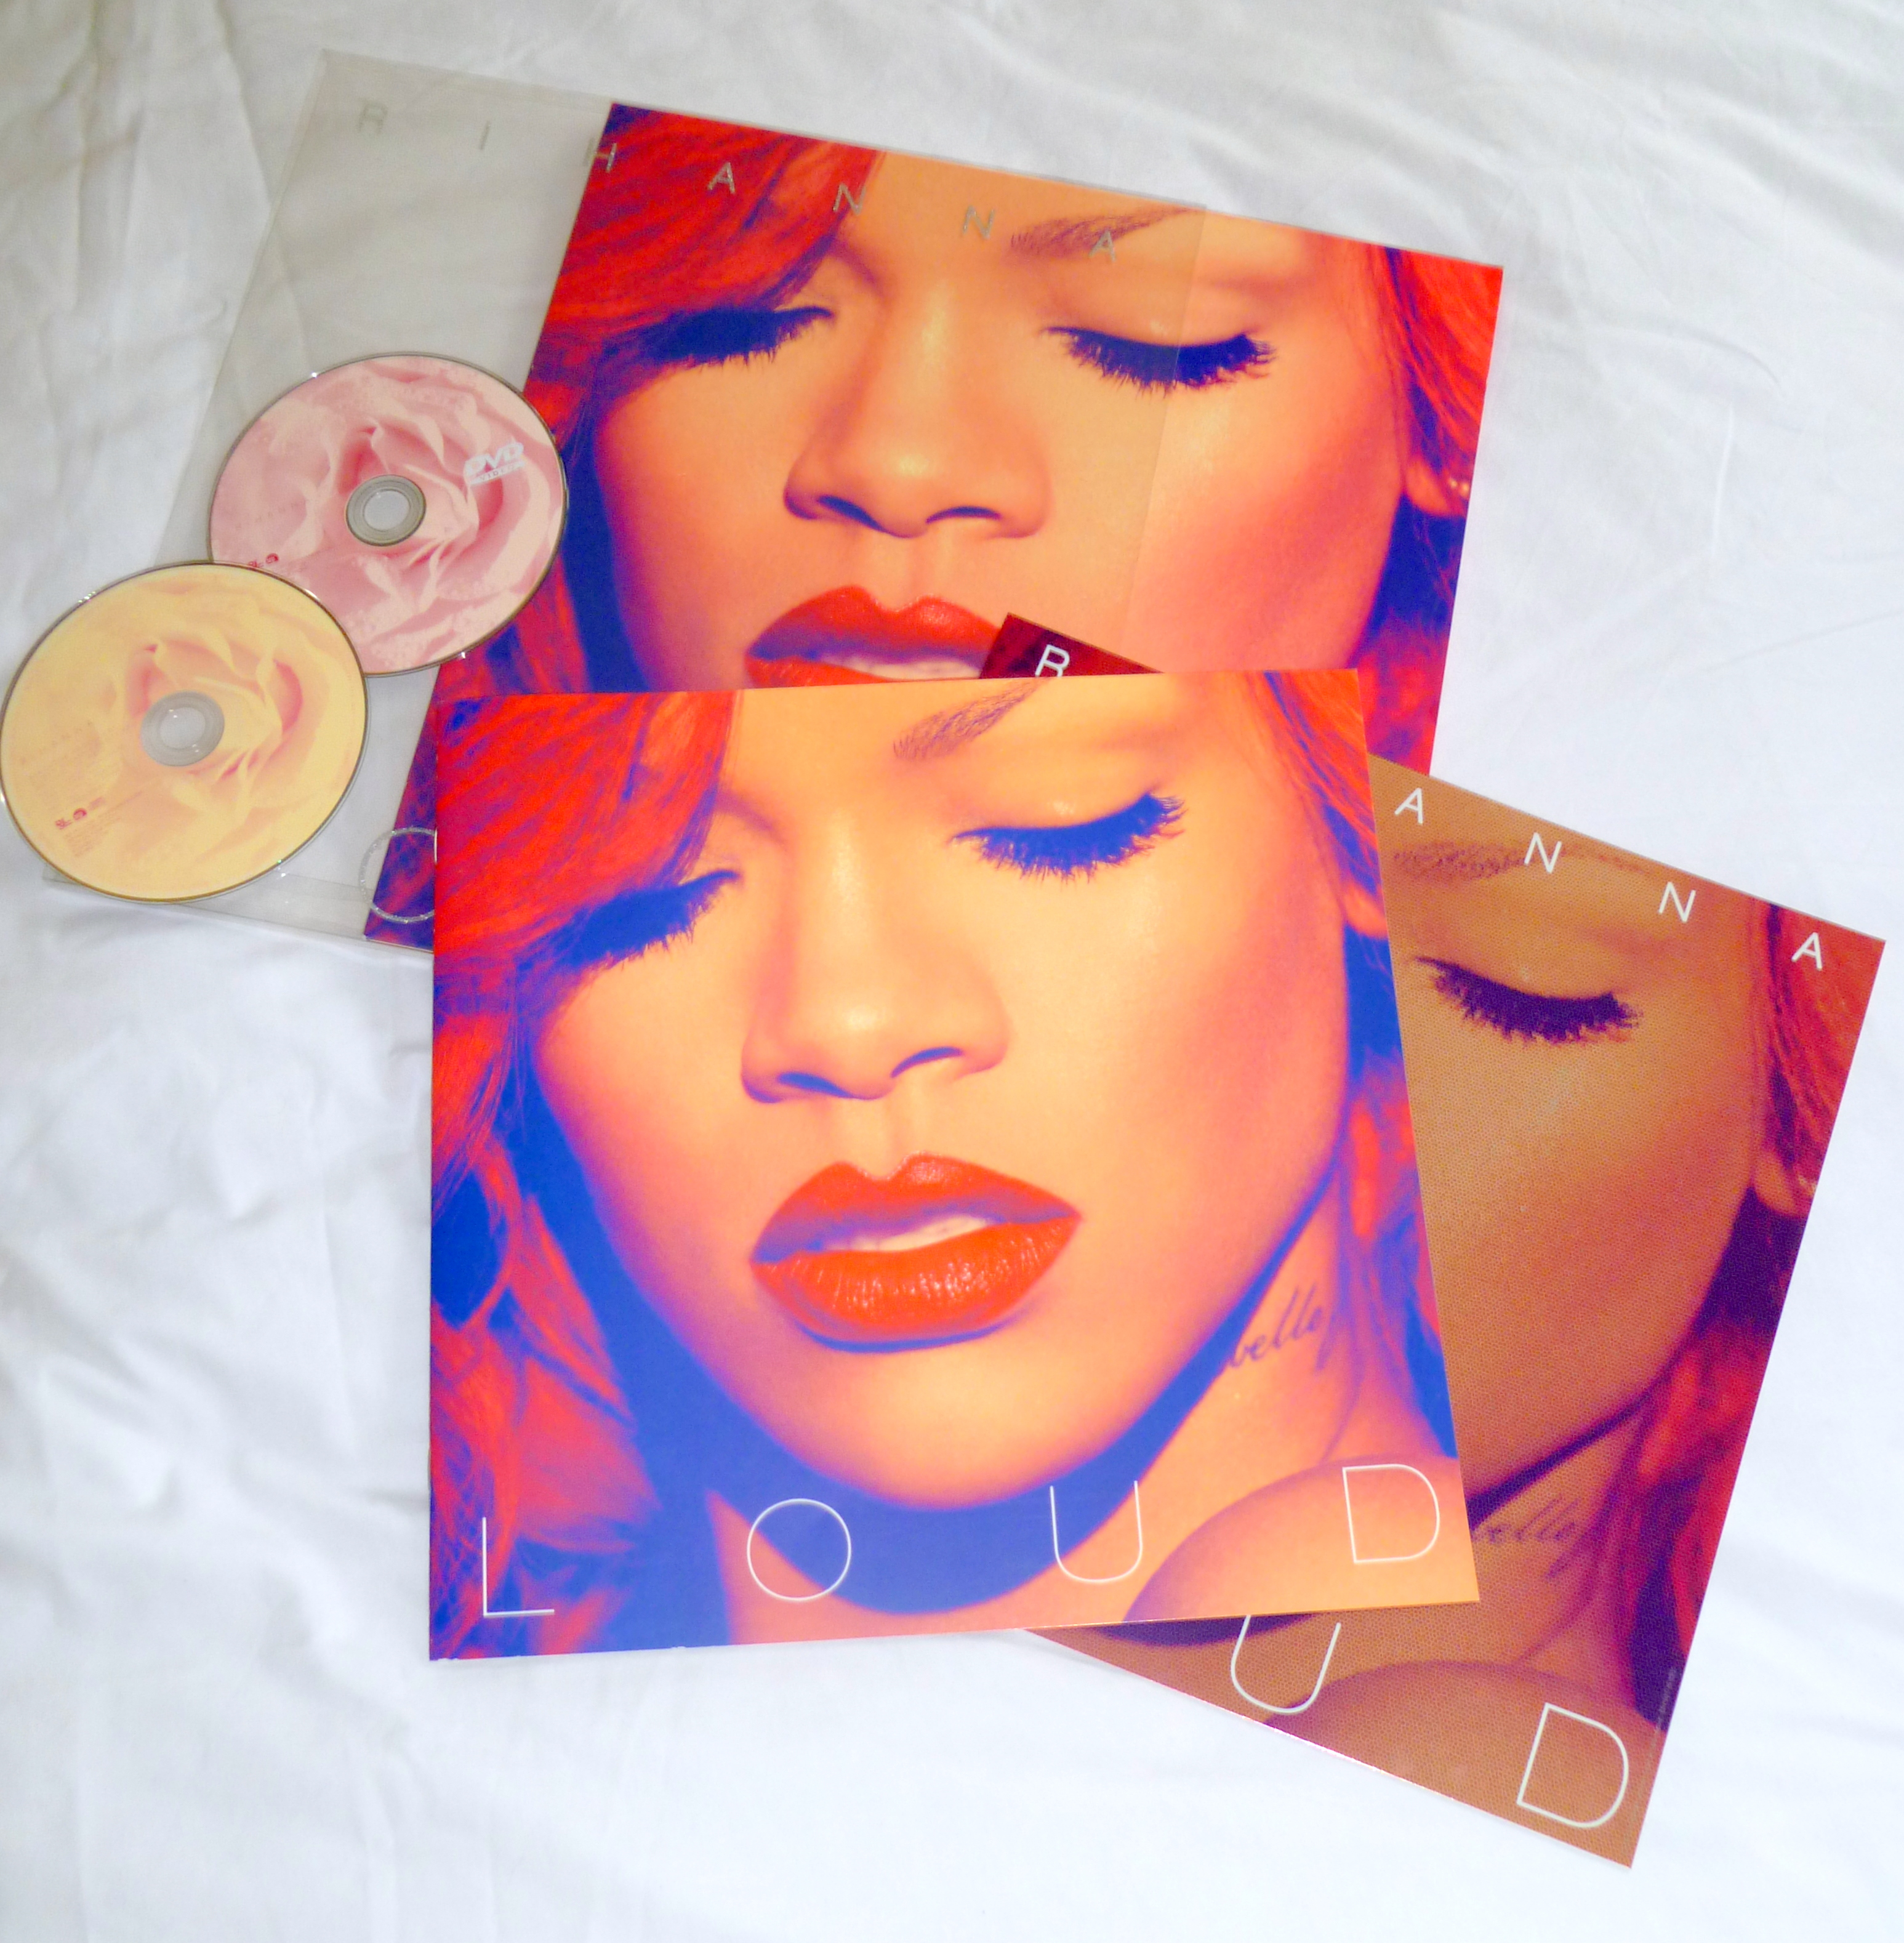 Rihanna Loud Deluxe Edition Images | Crazy Gallery